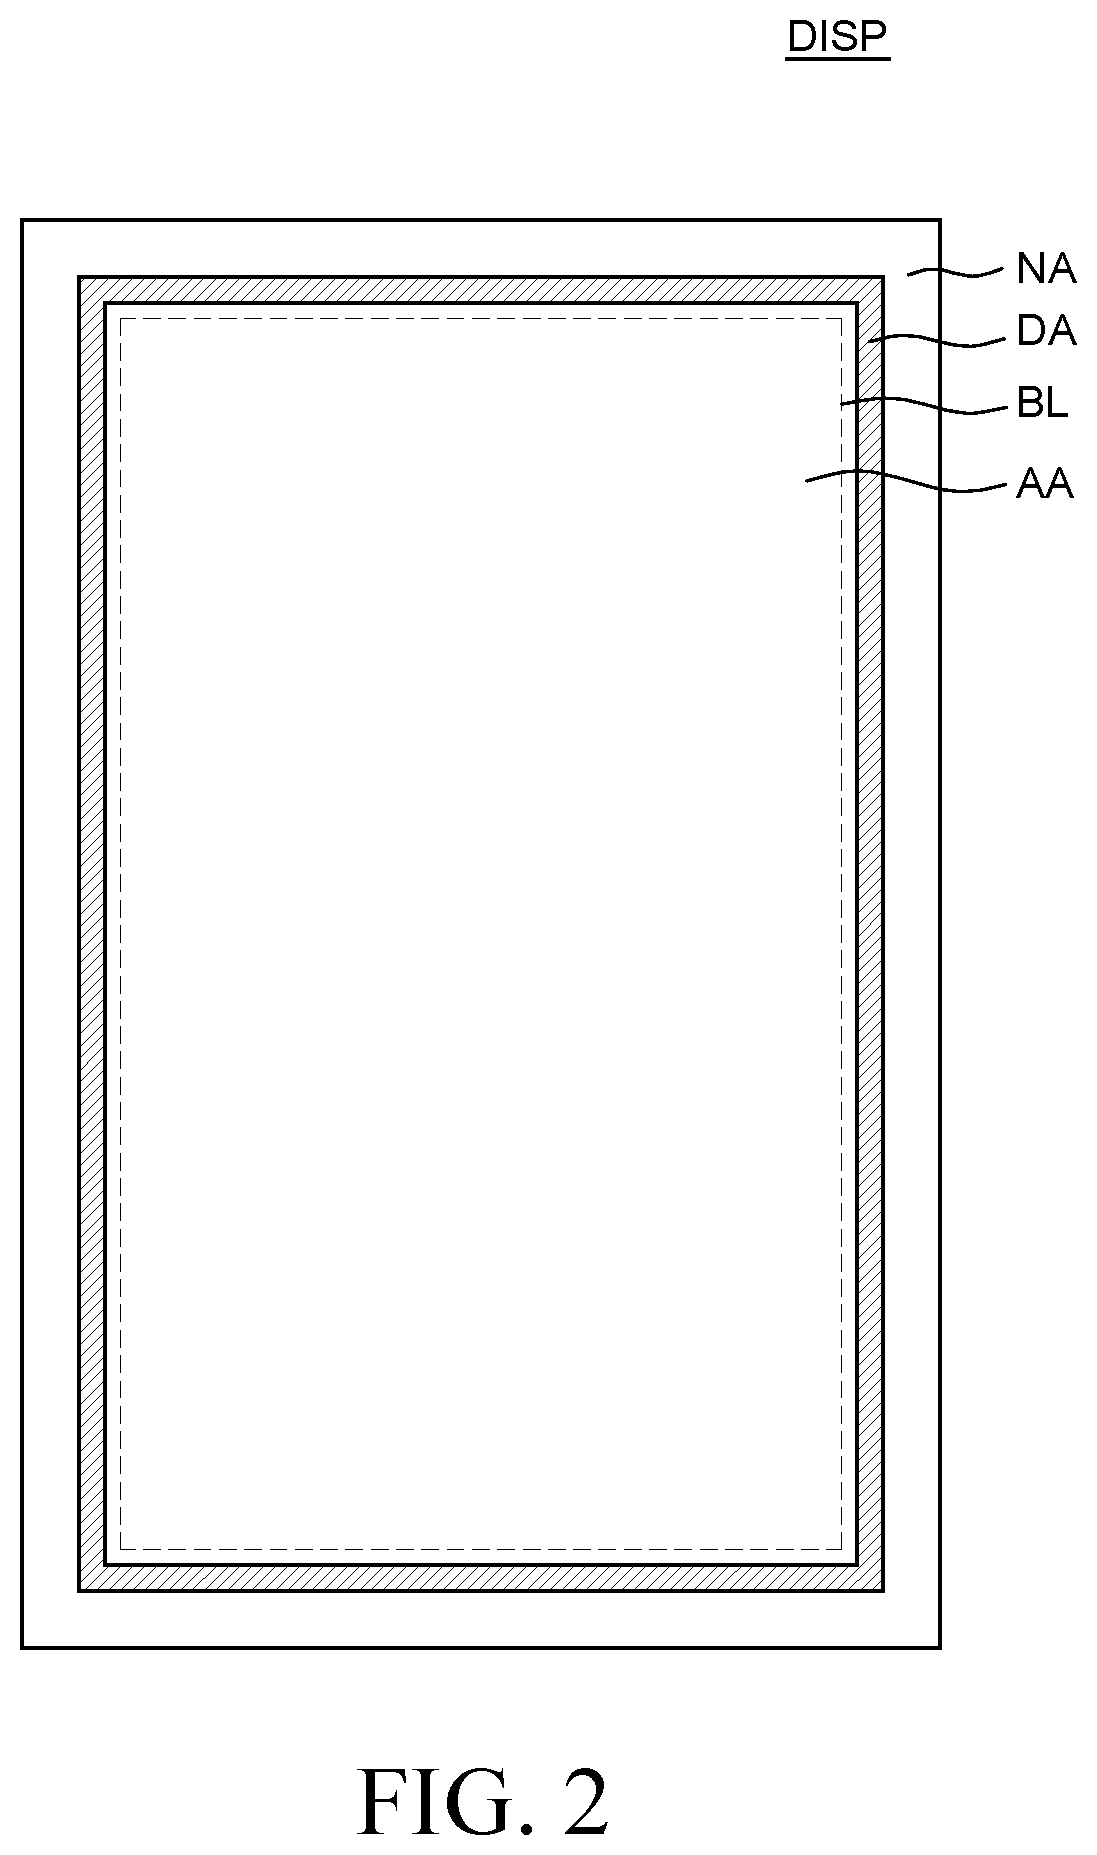 Light Emitting Display Device with Integrated Touch Screen